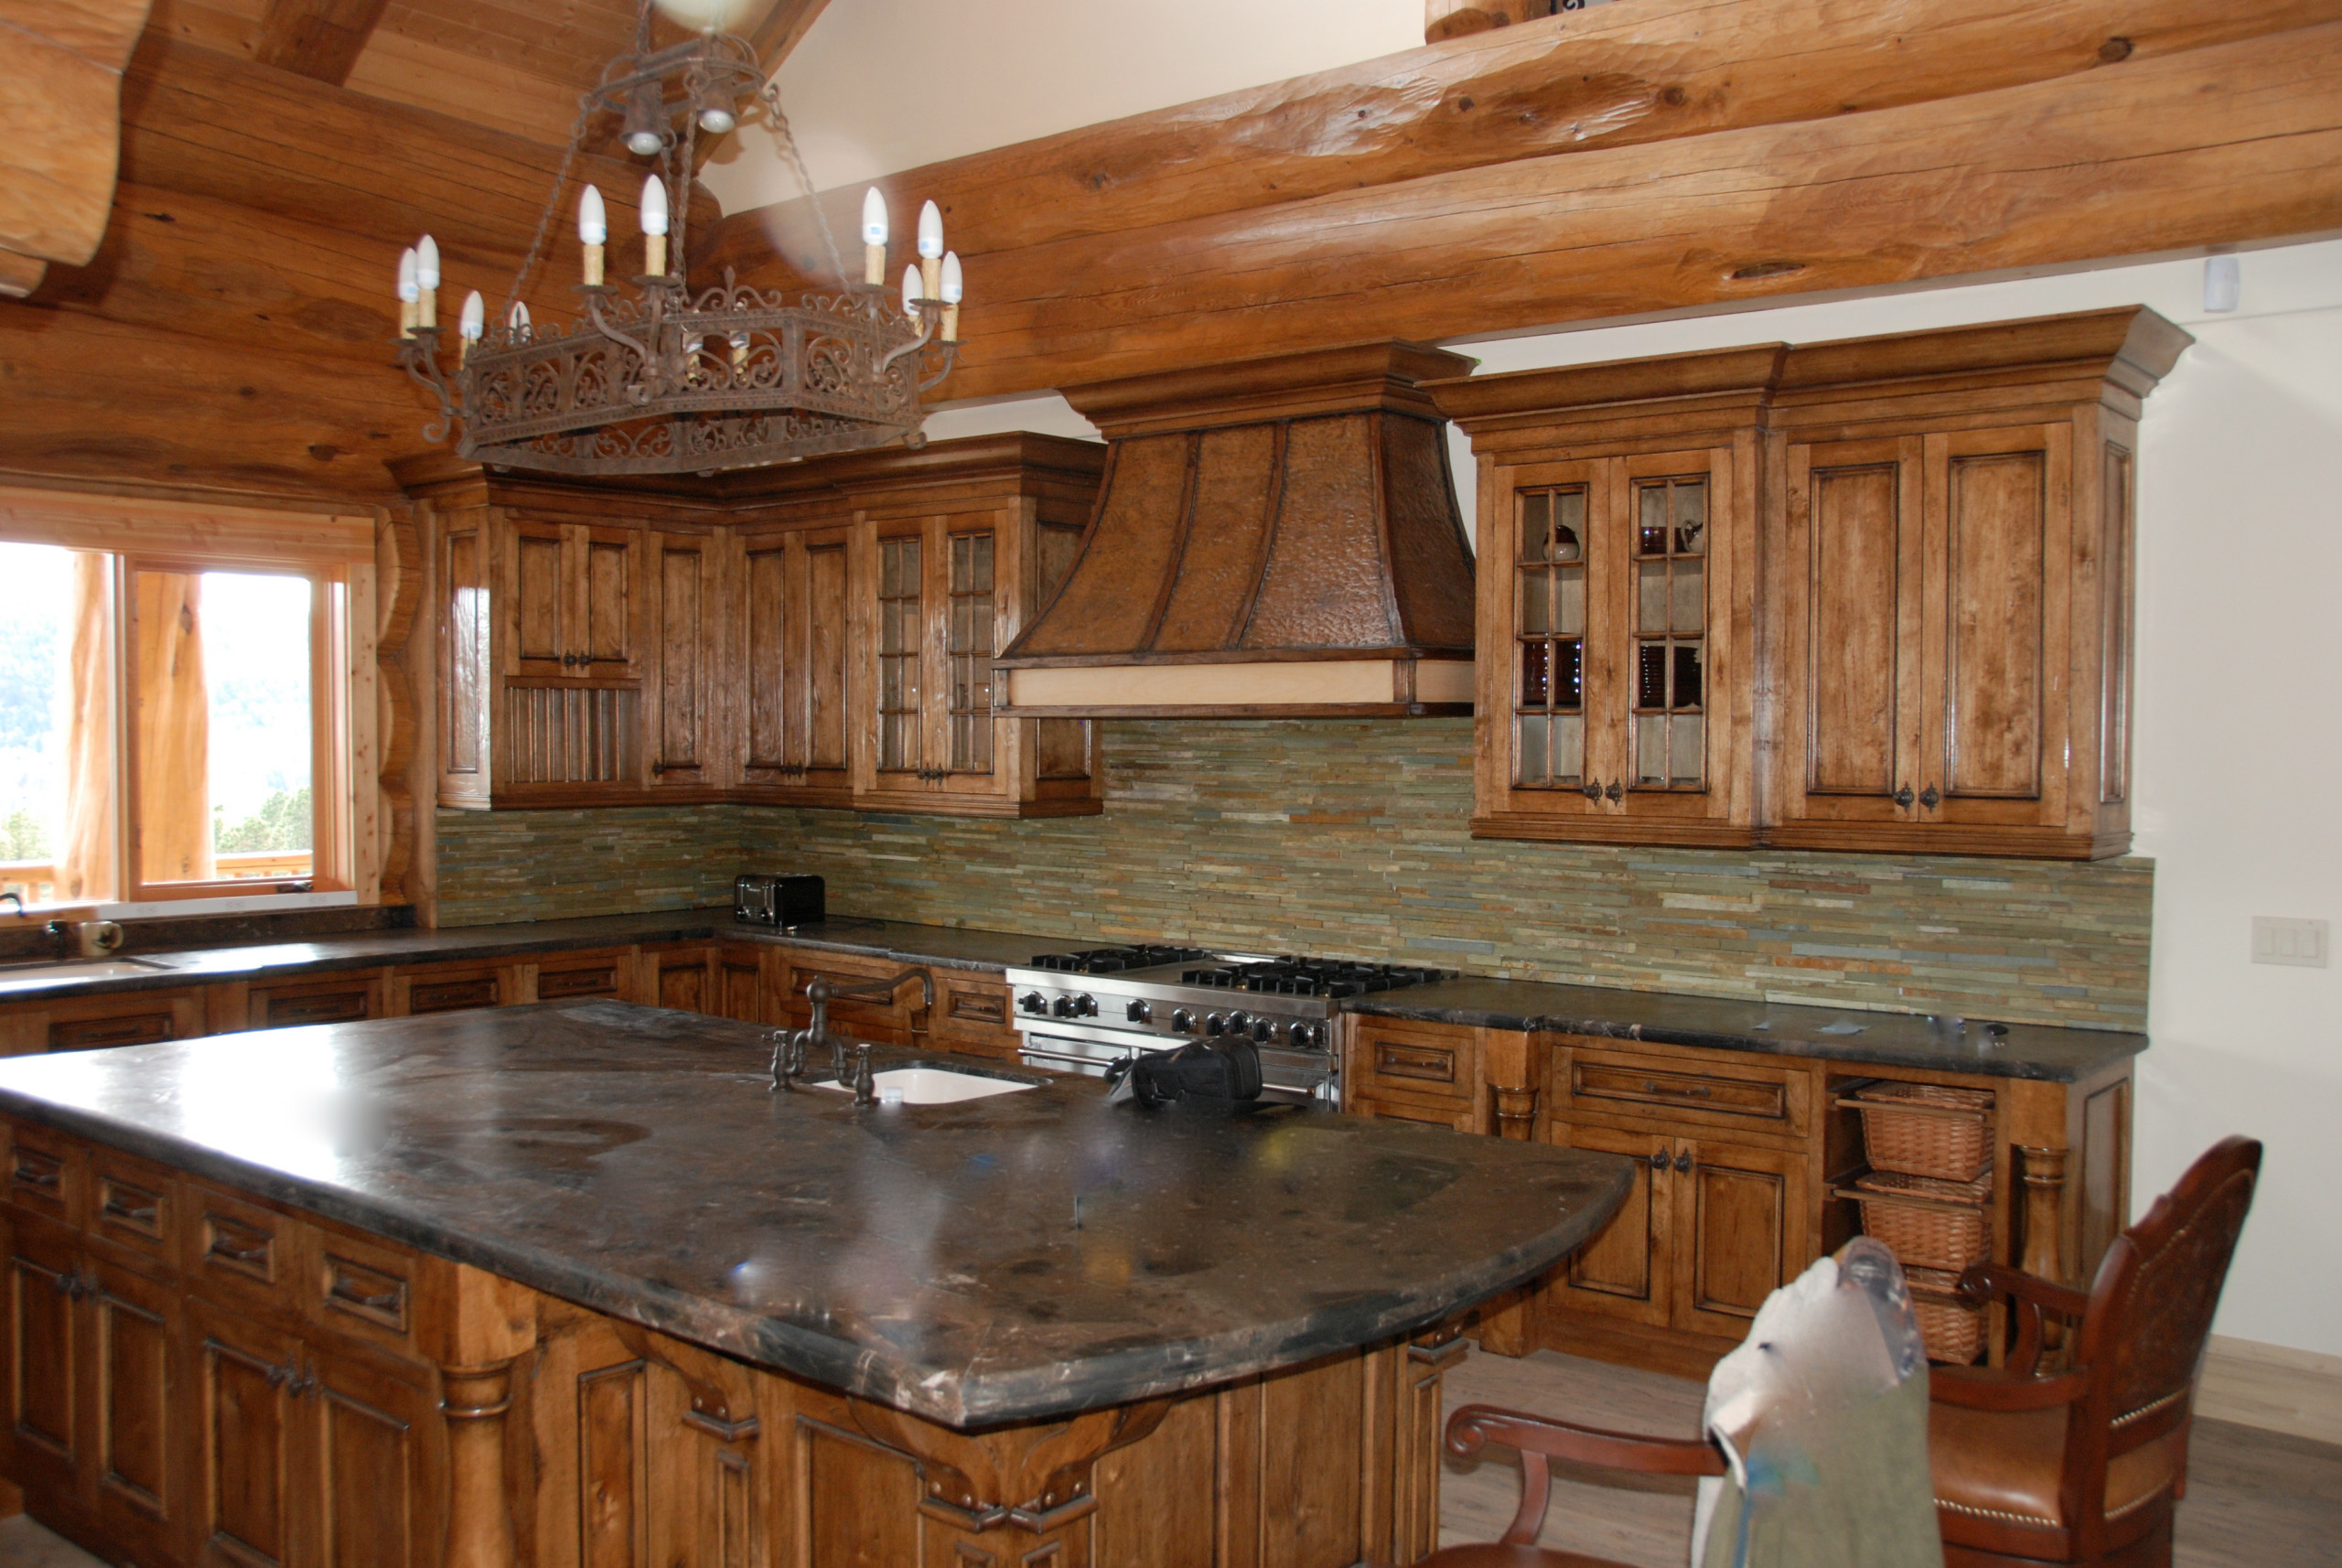 Home, Cabinets By Design Inc Duluth